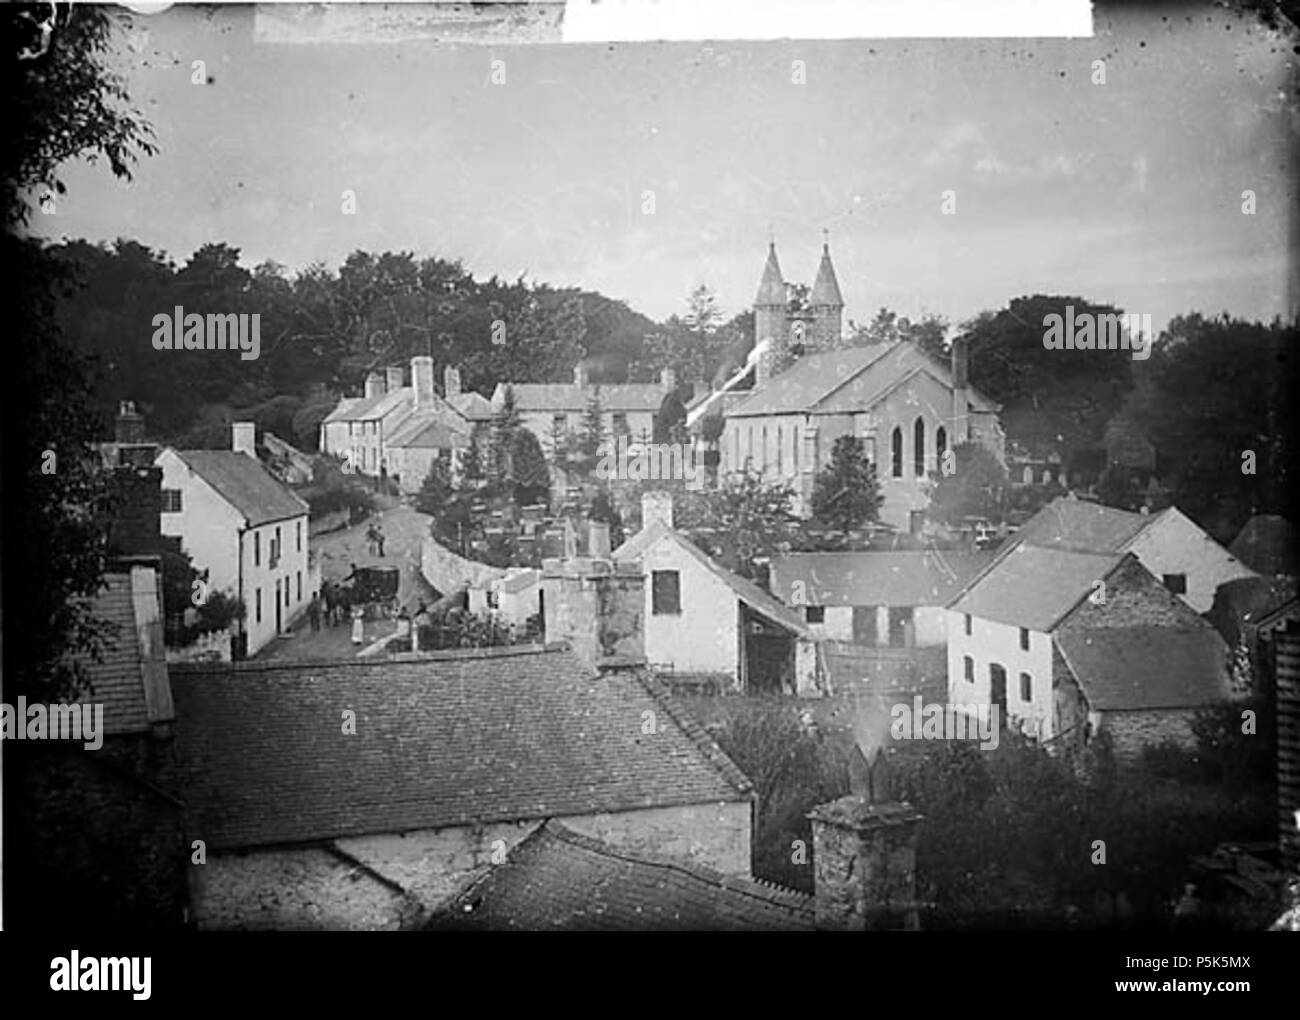 [A view of Betws-yn-Rhos from Cae'r Person] [graphic].. 1 negative : glass, dry plate, b&w ; 12 x 16.5 cm. circa 1885. Thomas, John, 47 A view of Betws-yn-Rhos from Cae'r Person NLW3362961 Stock Photo